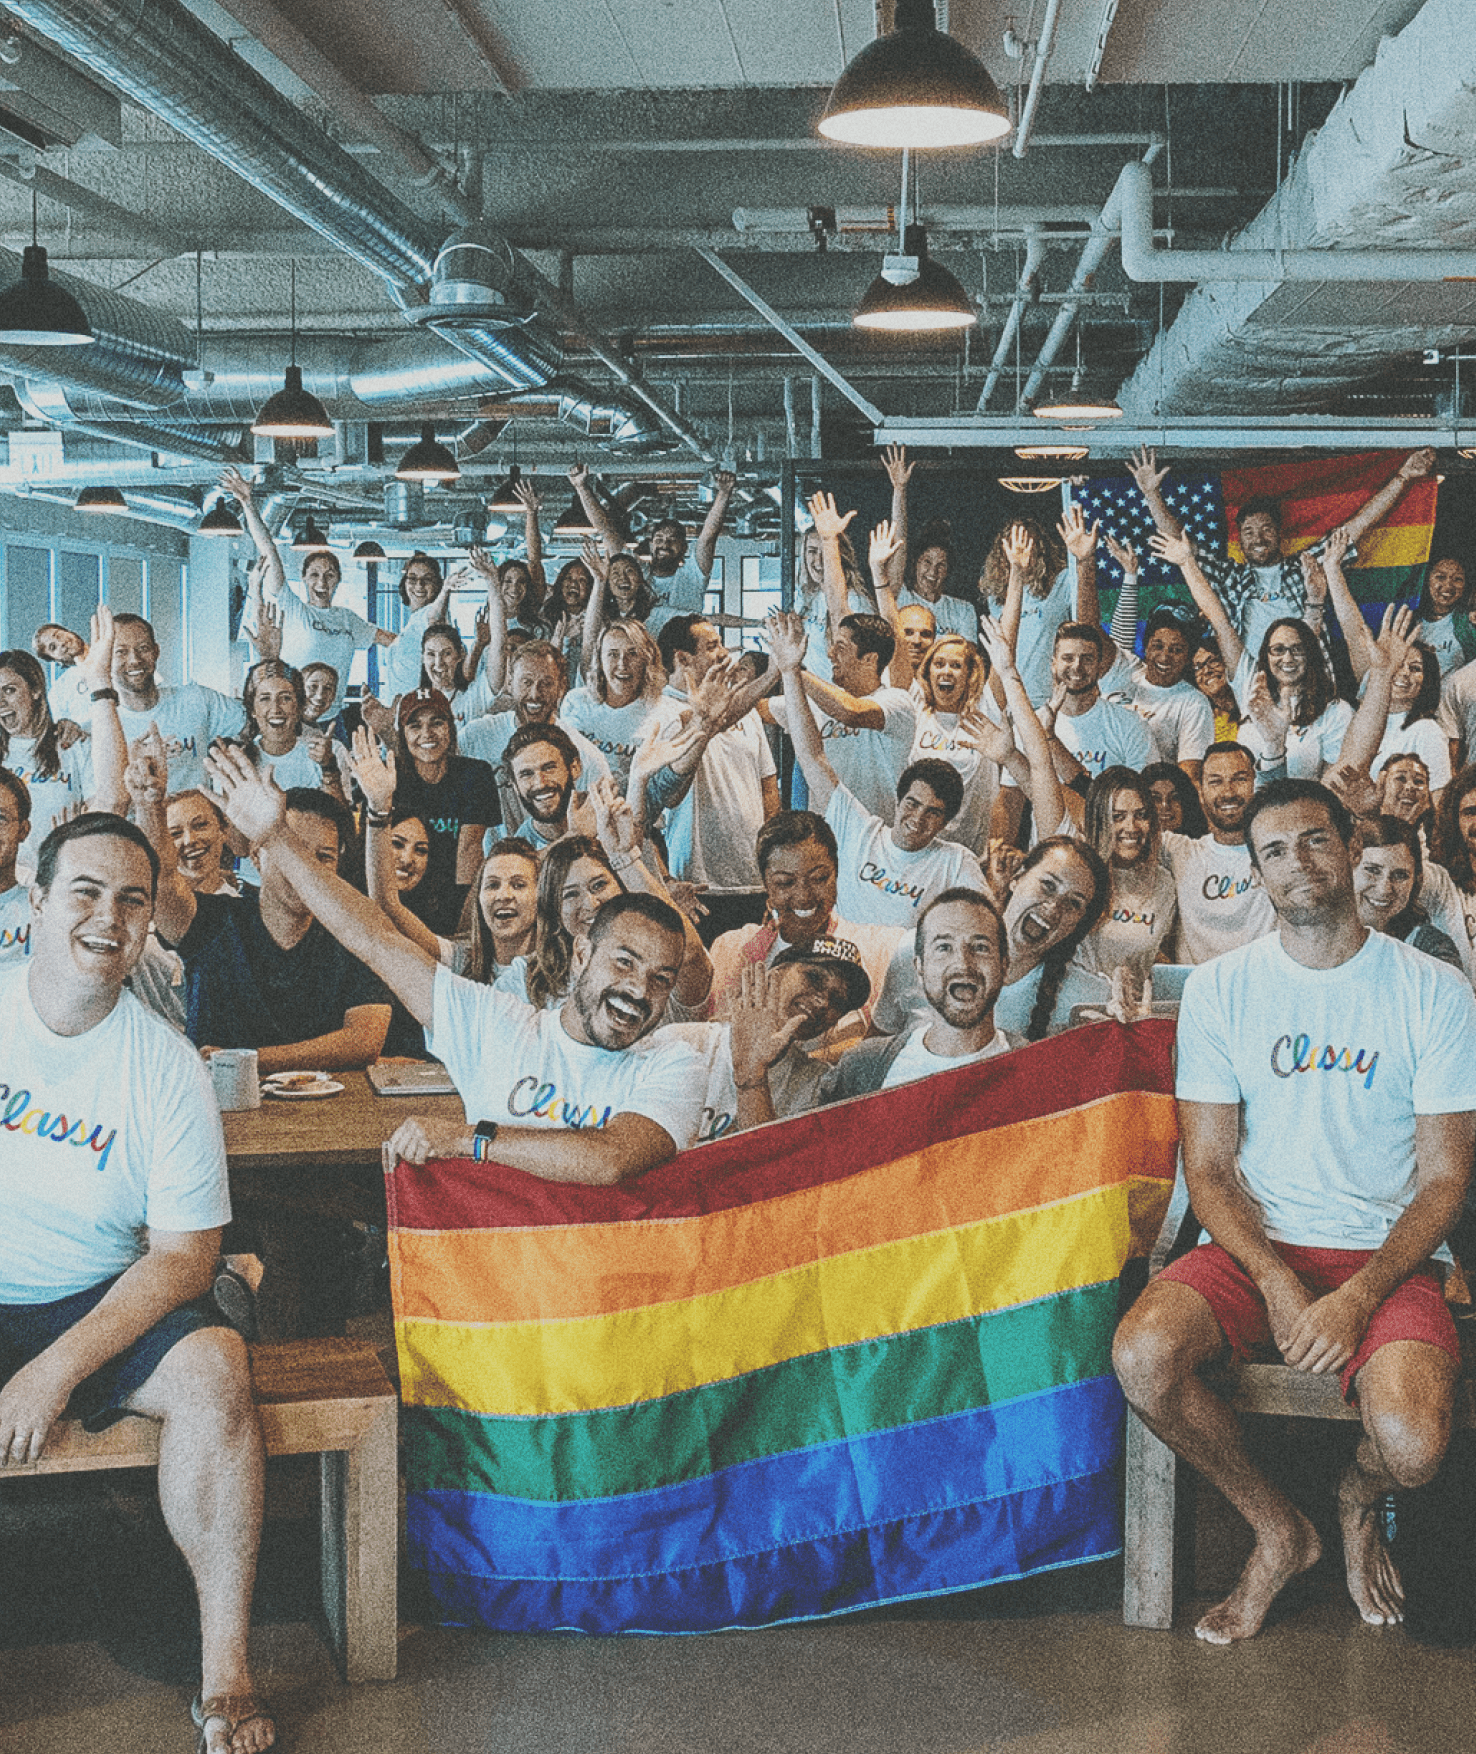 Team photo of Classy employees wearing Classy tshirts holding a rainbow flag